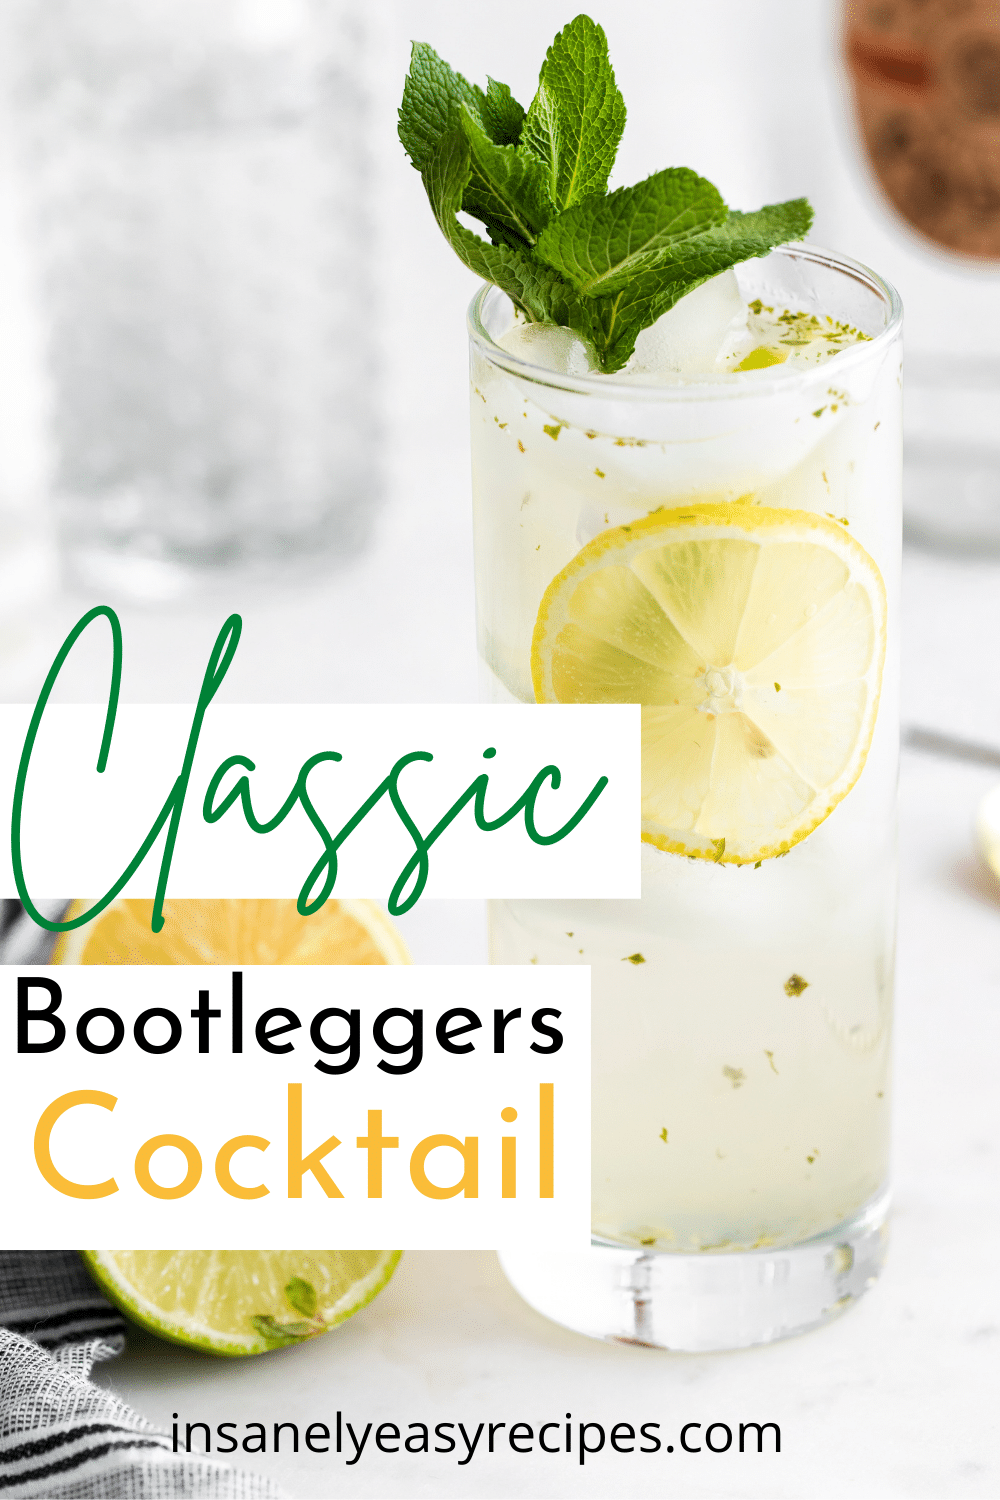 Bootlegger drink in a tall glass, garnished with mint leaves Text overlay says "classic bootleggers cocktail"